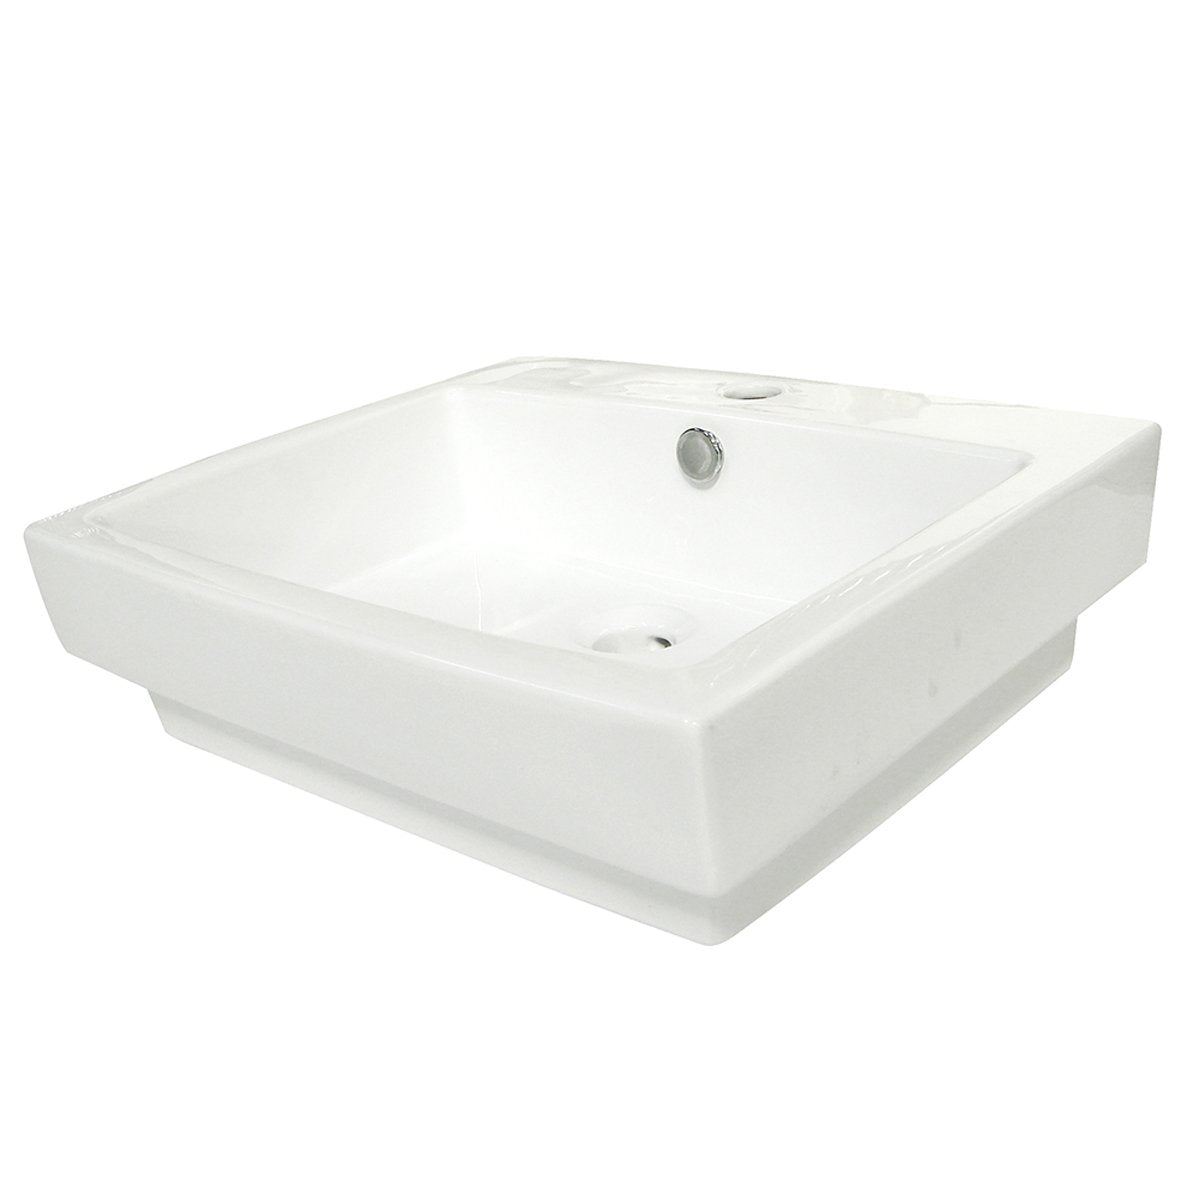 Kingston Brass Plaza White China Vessel Bathroom Sink with Overflow Hole and Faucet Hole-Bathroom Sinks-Free Shipping-Directsinks.